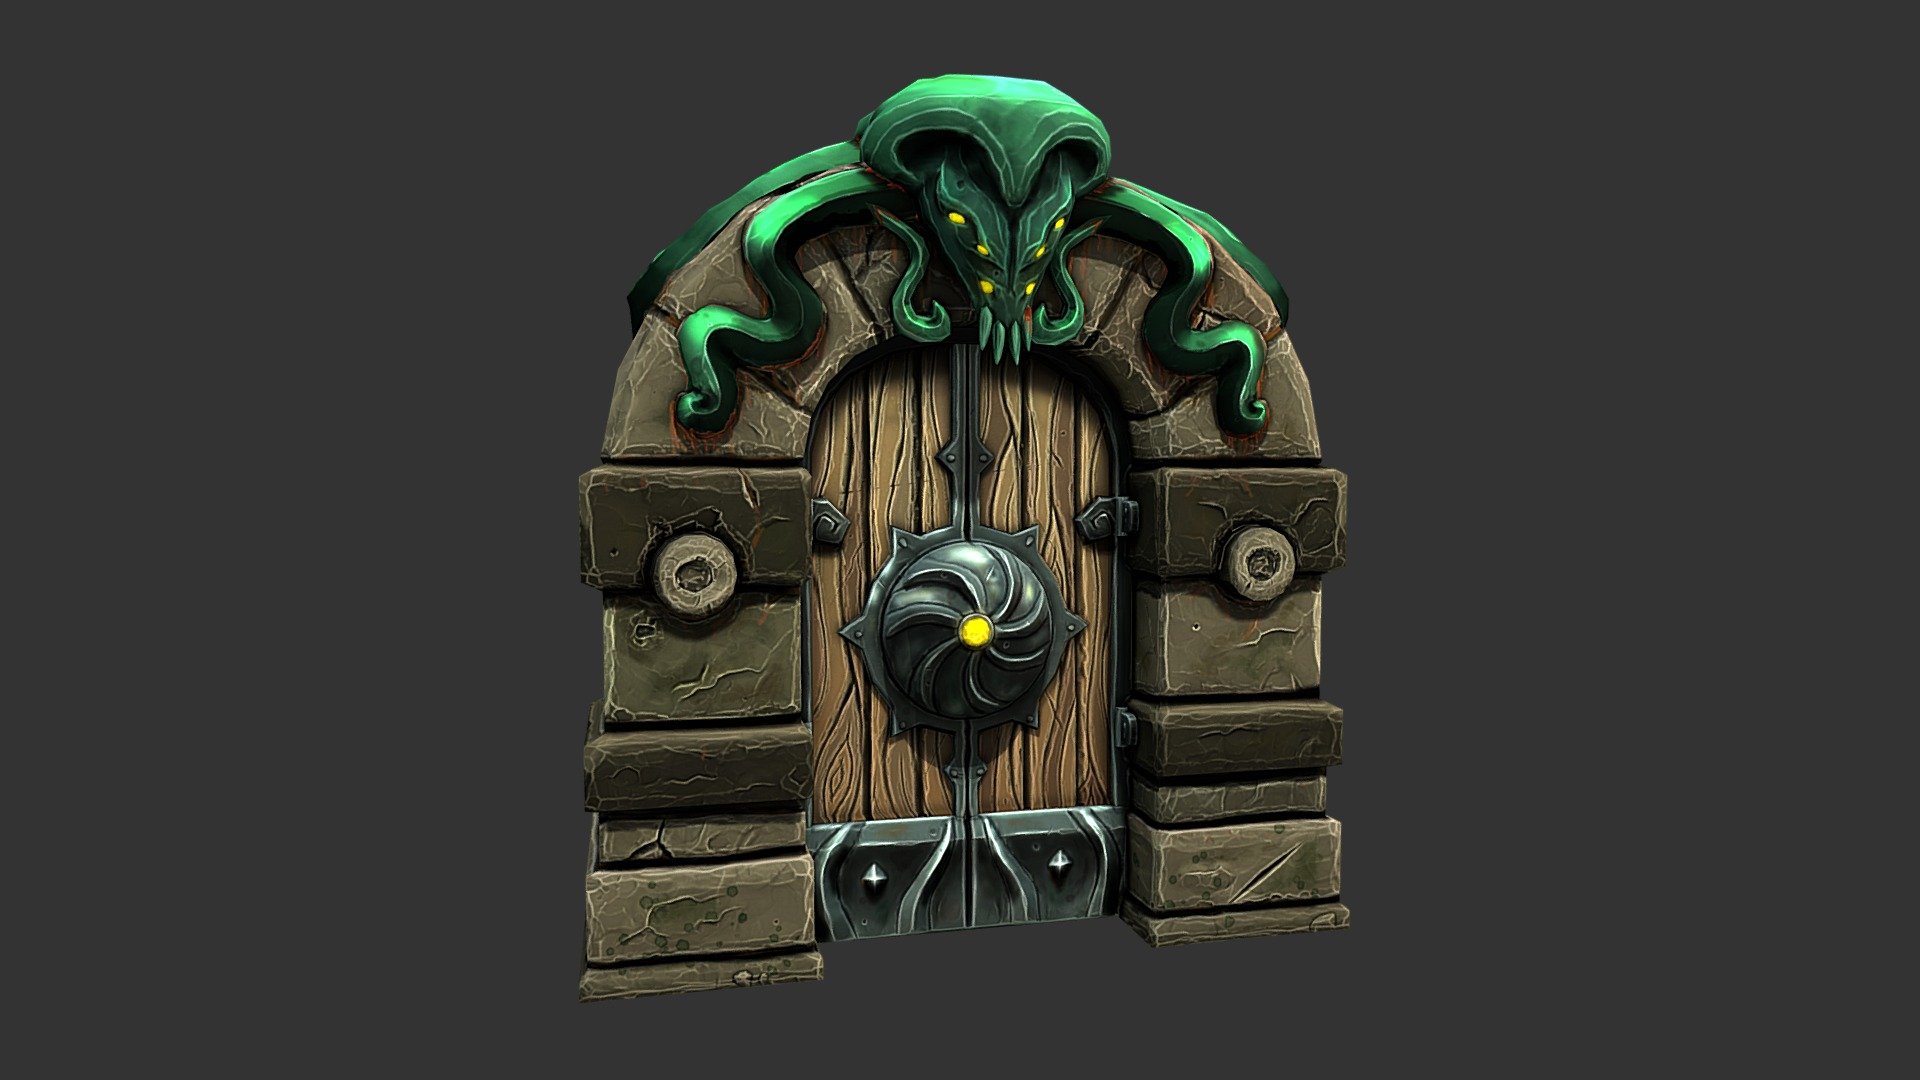 This prop has been one of the most challenging pieces I've done, but really fun to learn from. The model is based heavily off of Baldi Konijn's Dungeon Door concept art. https://www.artstation.com/artwork/3a0yo 
After creating the sculpt and low res, I tried to use the colors of the reference, and wasn't happy with how it looked. I instead used photos of Blizzard's recent showcase of Kul Tiras in World of Warcraft as a color theme. I'm happy with the result, but there are plenty of areas I can still improve, and this project was amazing at teaching me new methods for the style 3d model